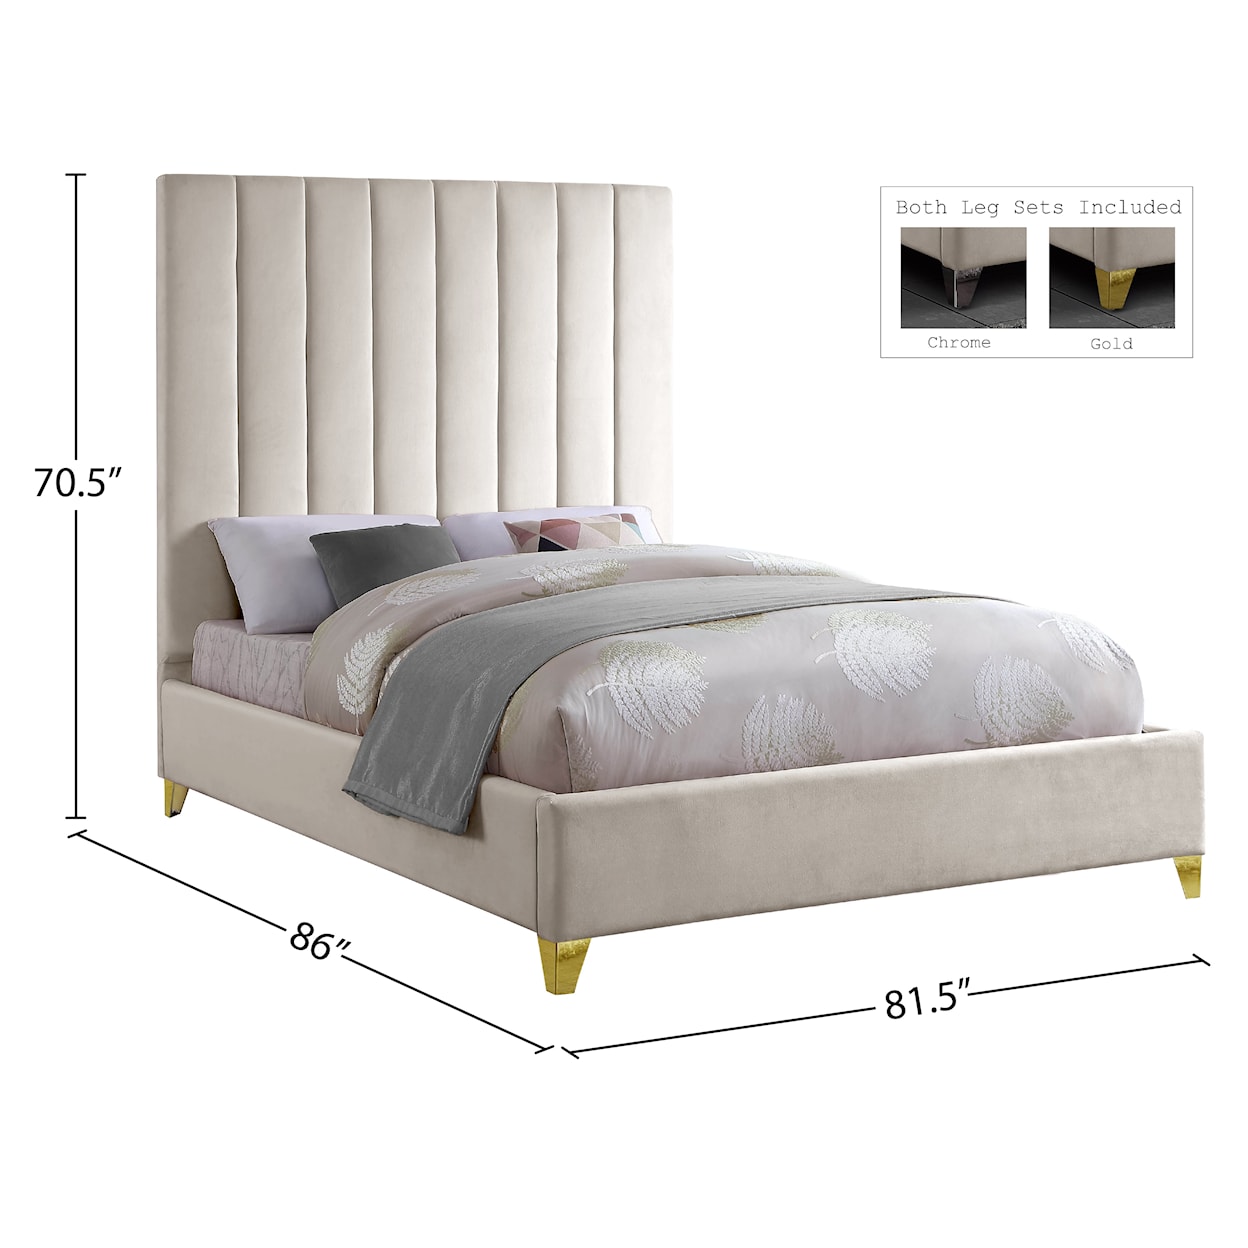 Meridian Furniture Via King Panel Bed with Channel Tufting